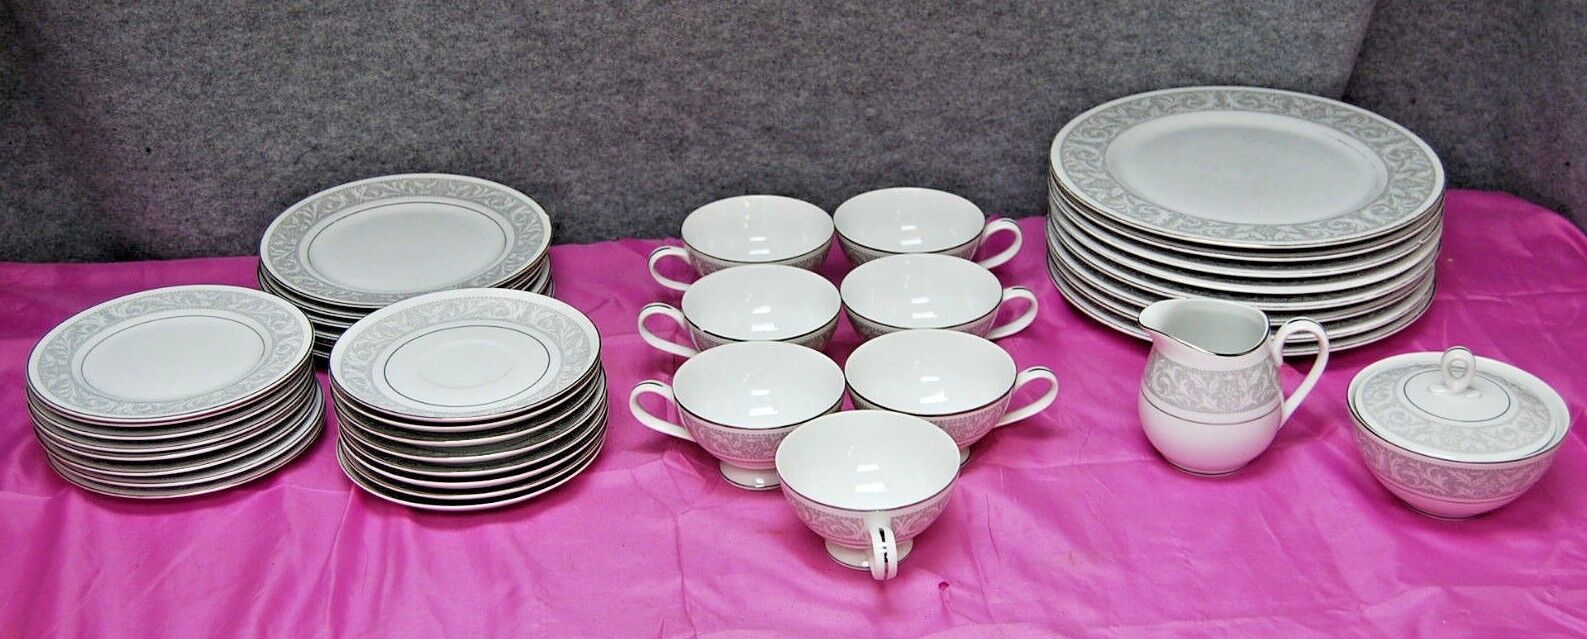 Imperial China Whitney 5671 Plates Cups 39 Pieces Vintage  L2573